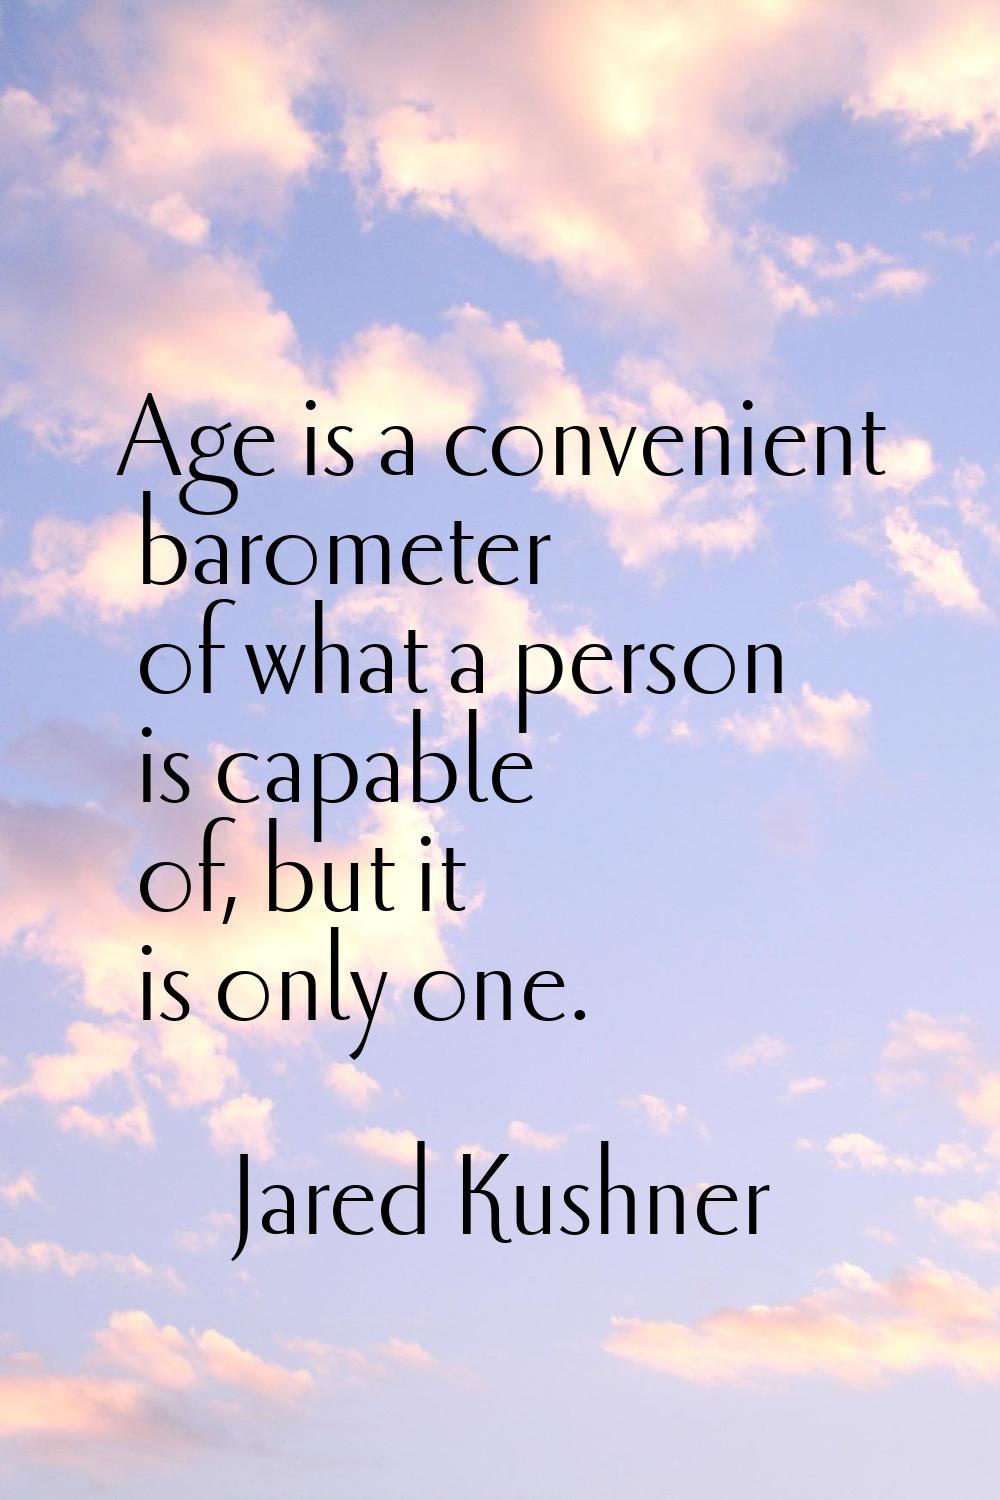 Age is a convenient barometer of what a person is capable of, but it is only one.